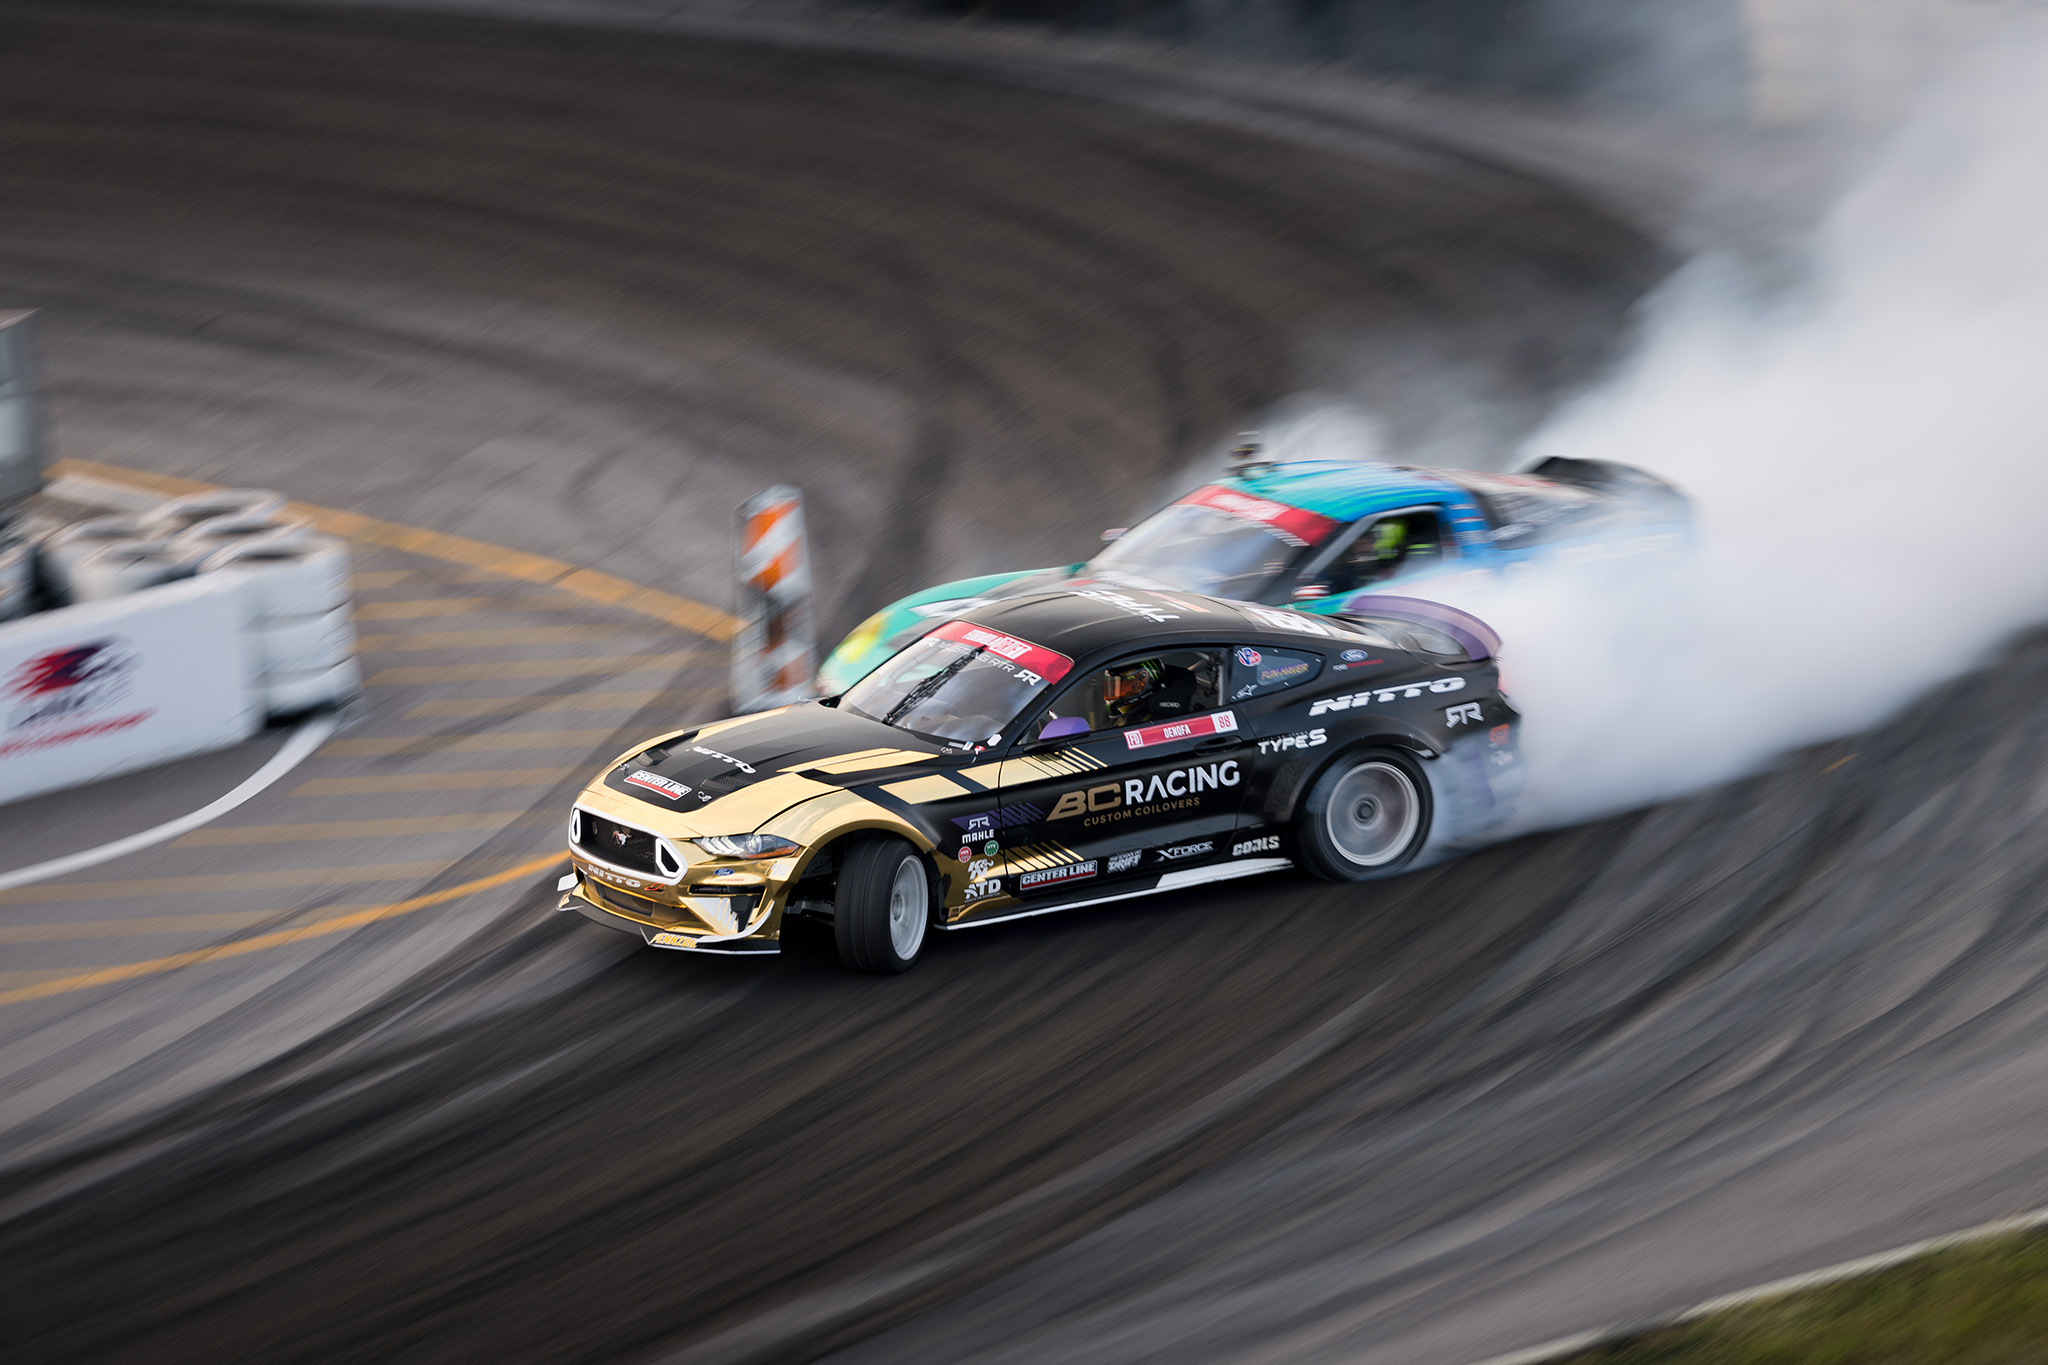 Chelsea DenoFa Nitto Tire Ford Mustang RTR drifting at Formula D Pro drifting championship 2020 double header Round 2 at St. Louis, motorsports photography by Luke Munnell